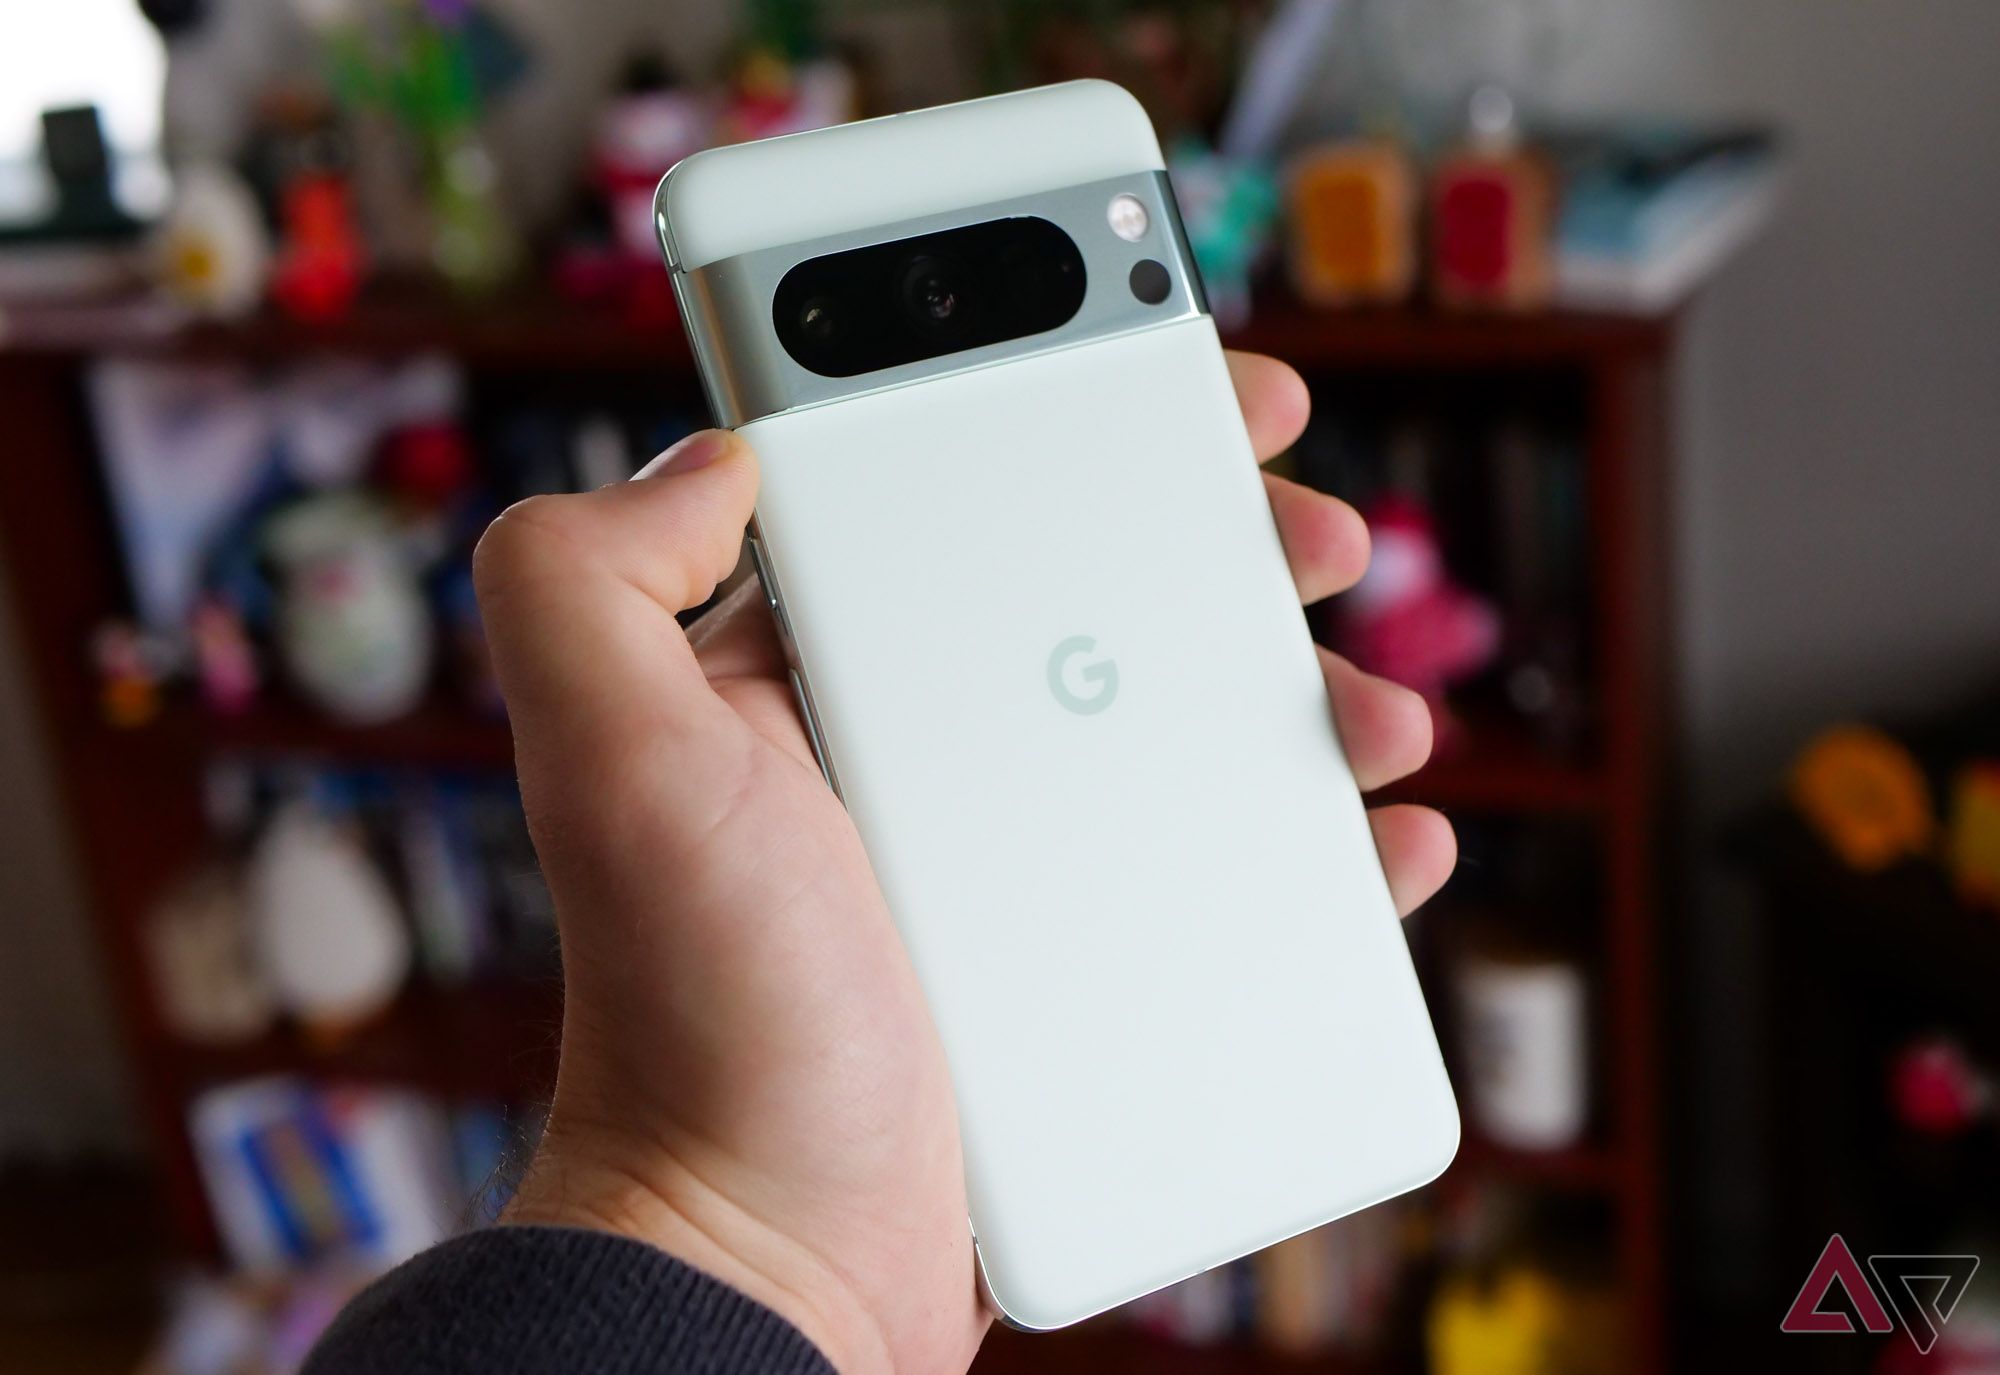 6 times Google leaked its own phones